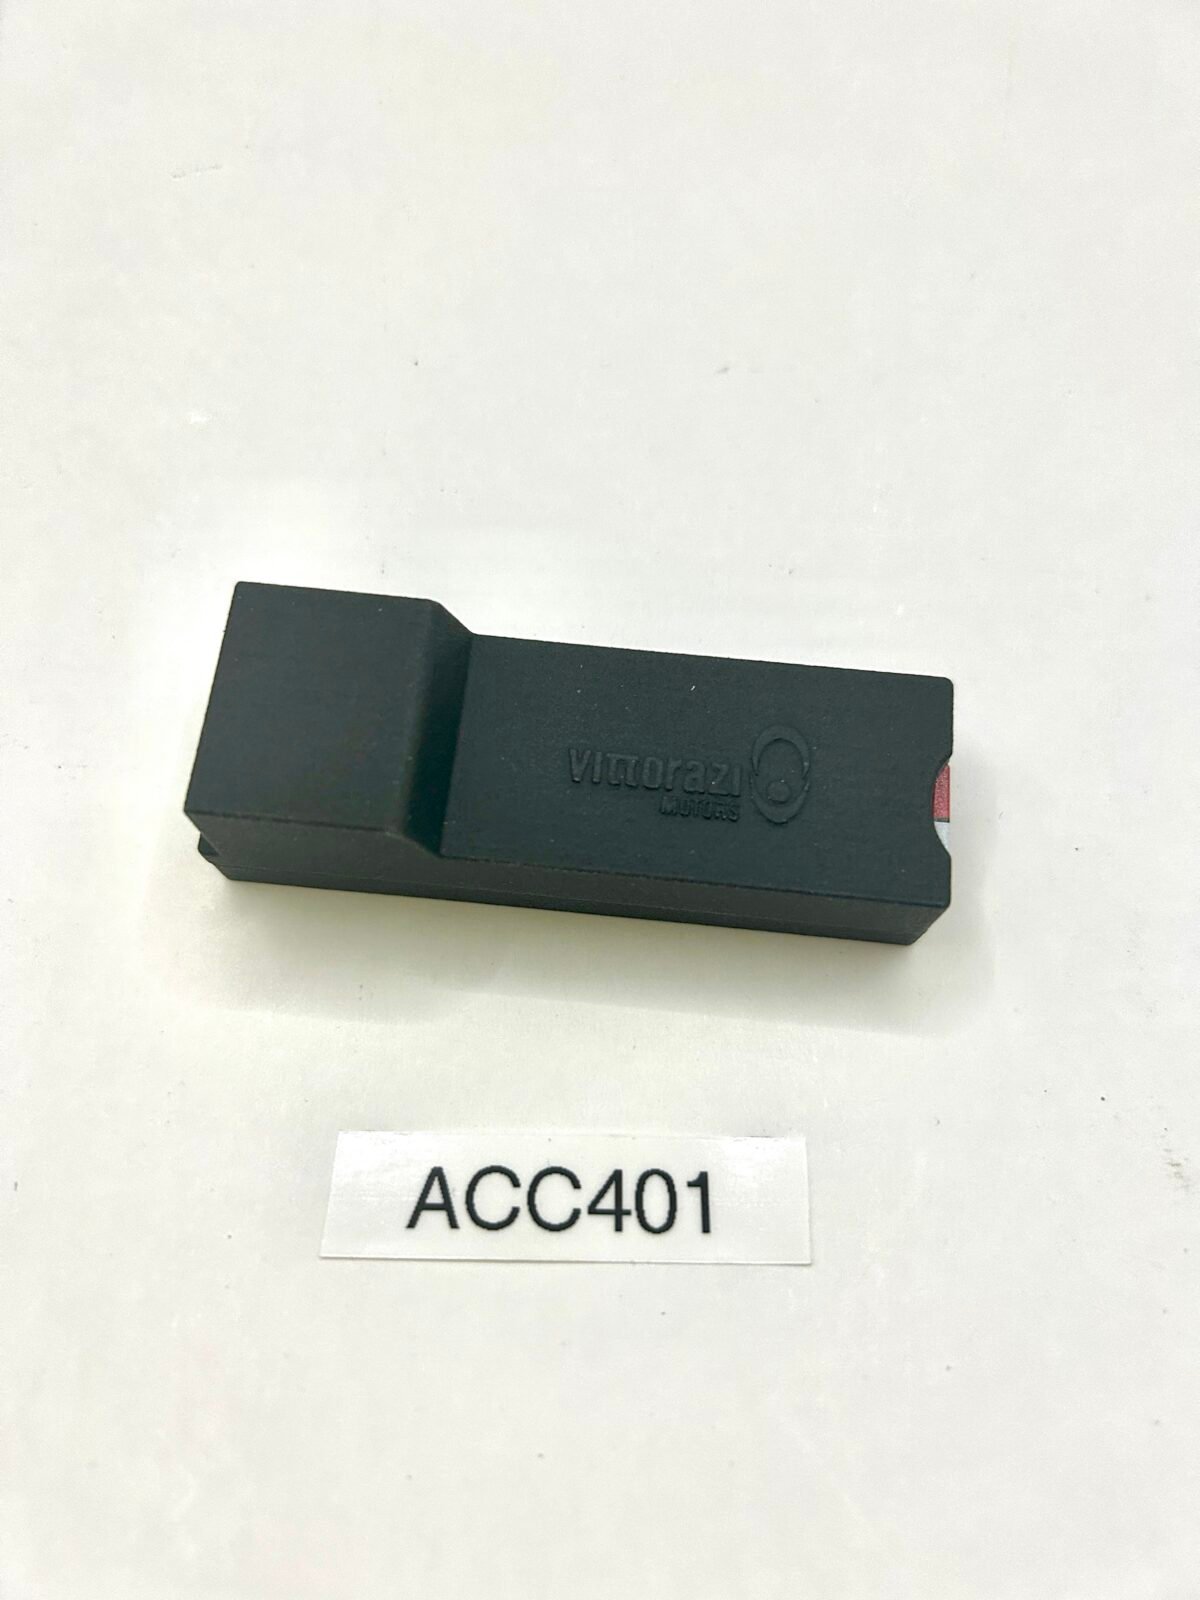 ACC401 MosterEFI Telemetry Box with MicroSD 16Gb